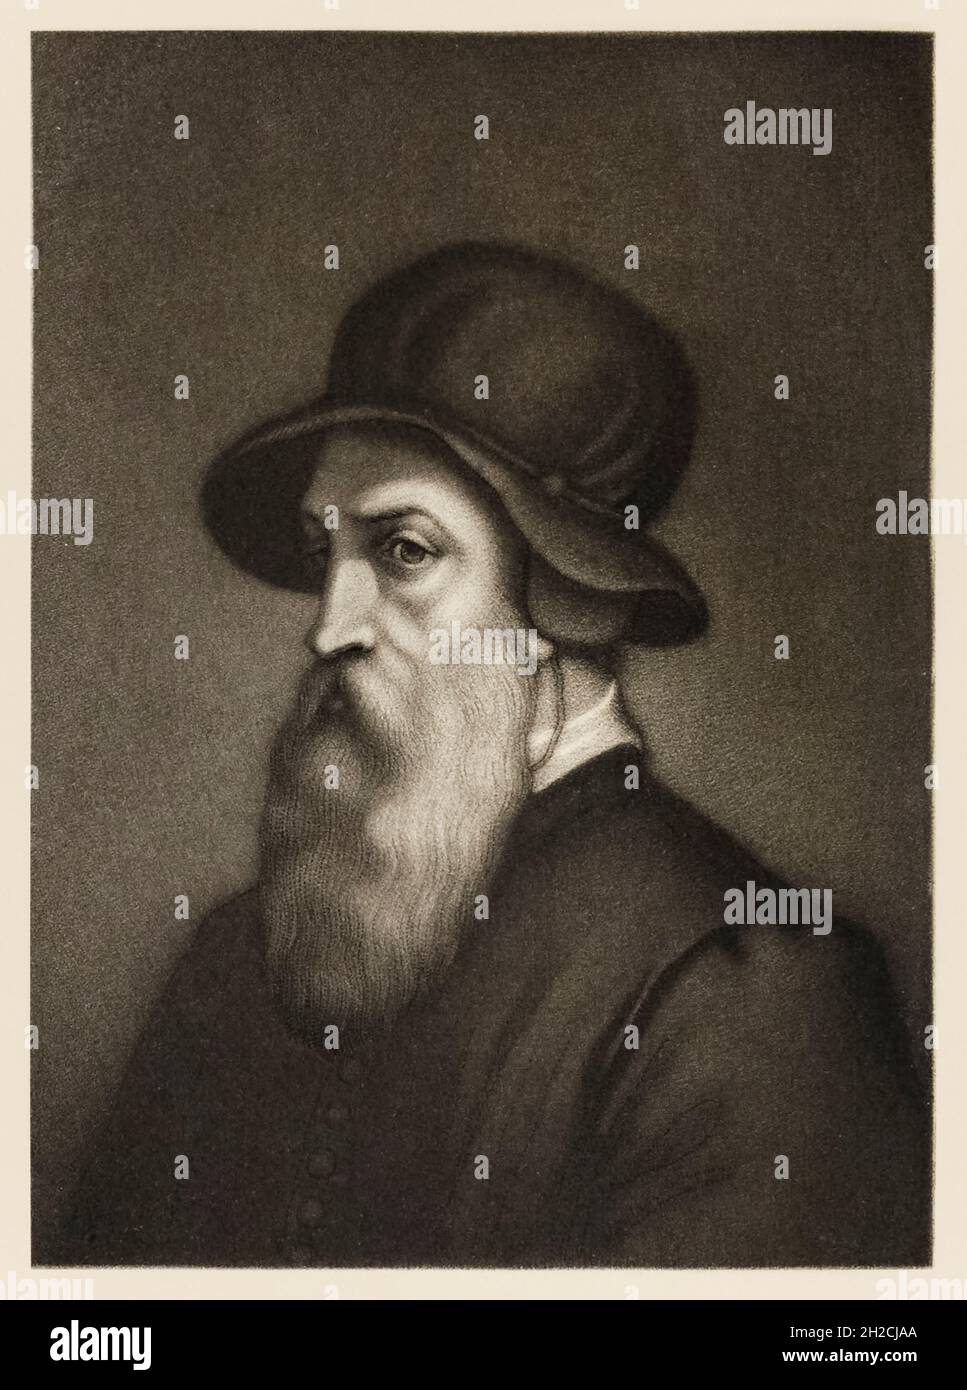 Benvenuto Cellini (1500-1571) Italian goldsmith and sculptor best remembered for his infamous and colourful autobiography about life during the Renaissance period. Photograph of an original 19th century engraving. Stock Photo